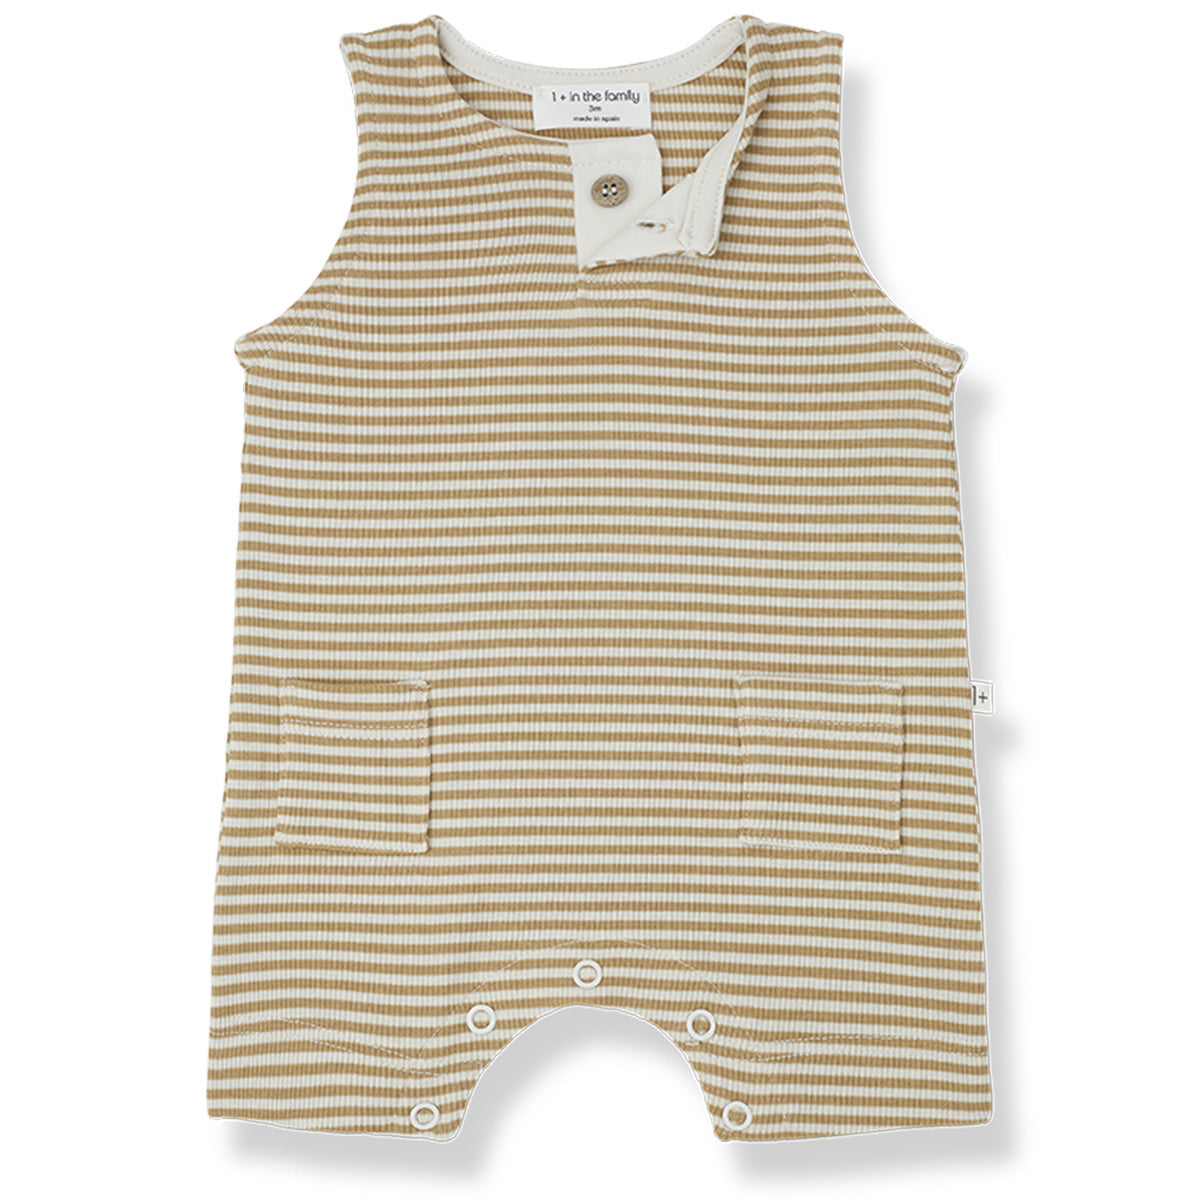 The Mauro Romper from 1 + in the Family. Sweet baby romper in a striped rib jersey fabric. 